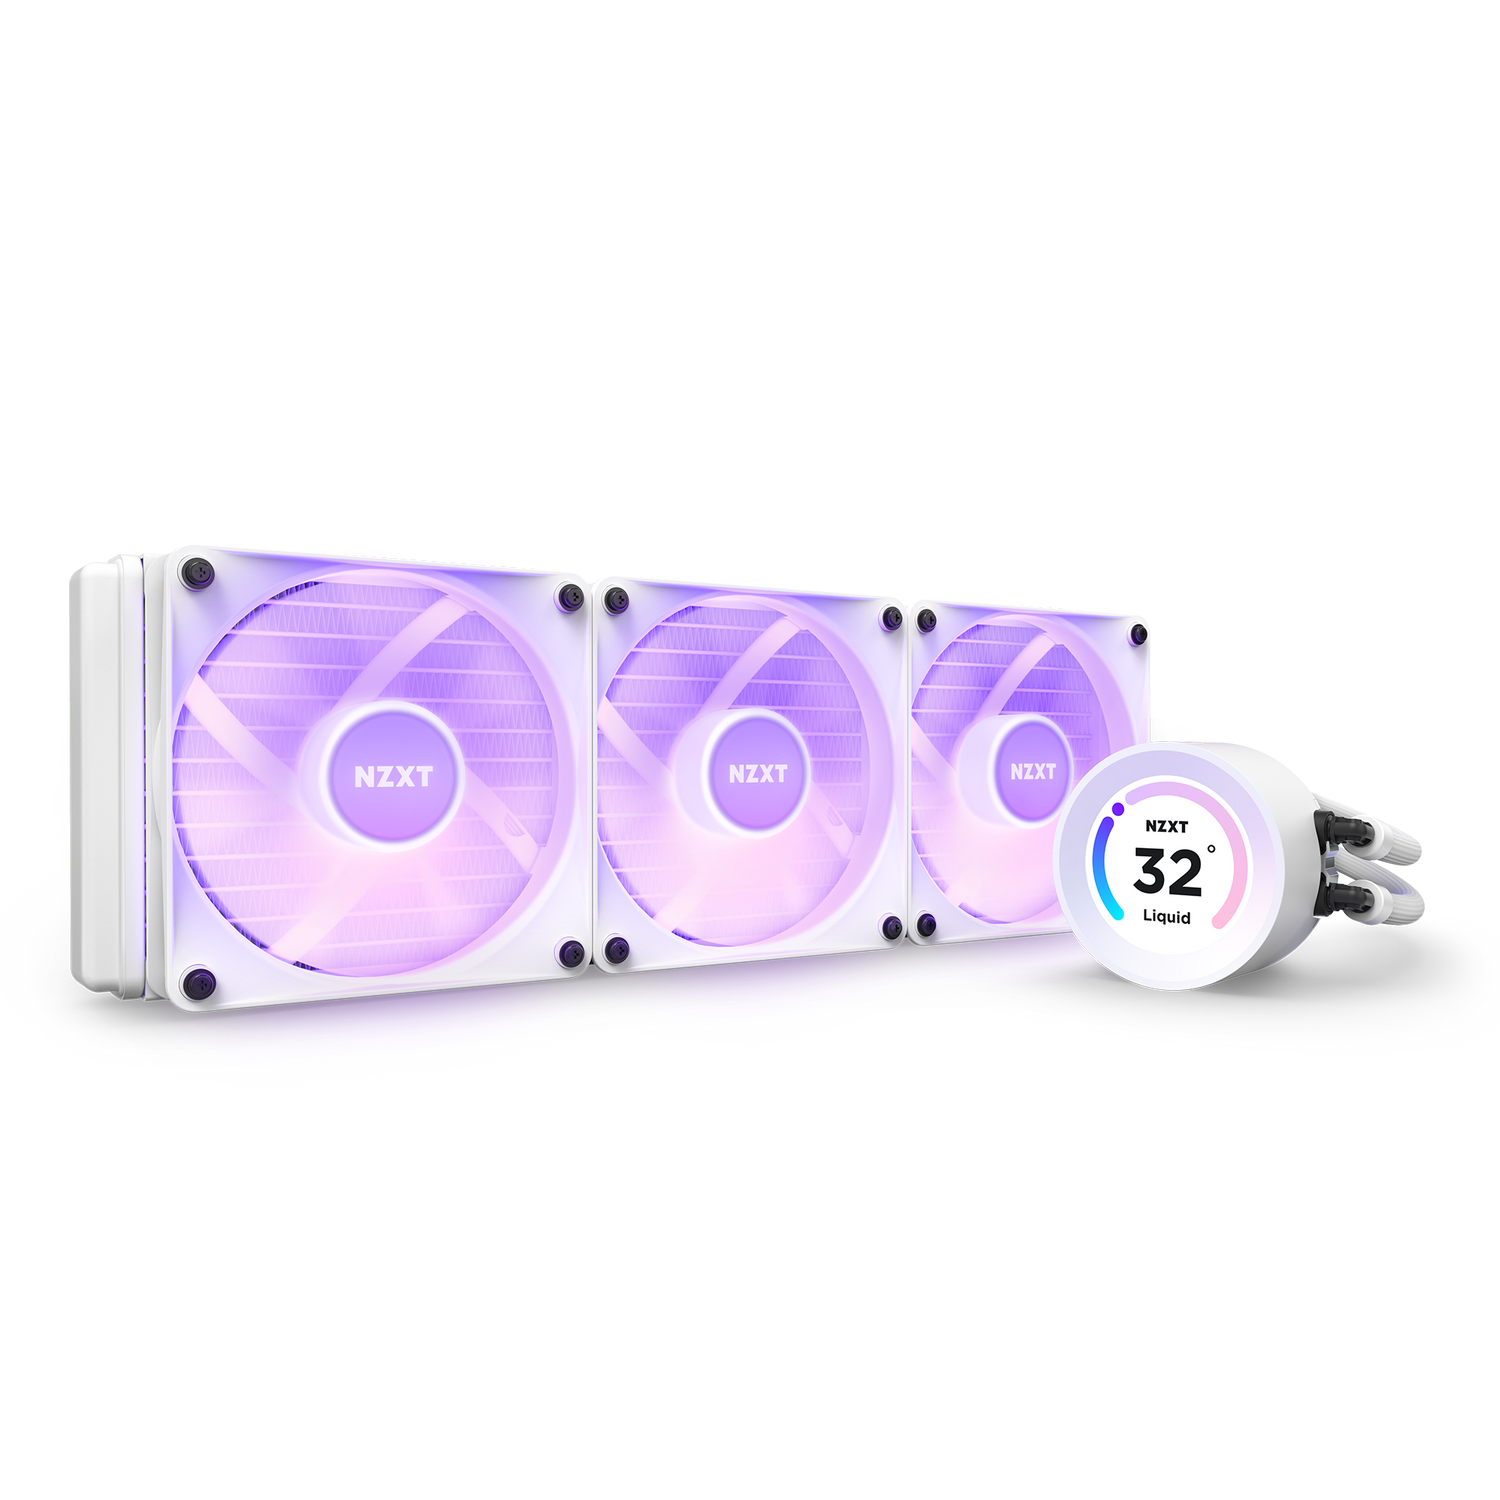 NZXT Announces Their Newest Line of Krakens AIO Liquid Coolers:   Kraken Elite and Kraken and New RGB H Series Cases